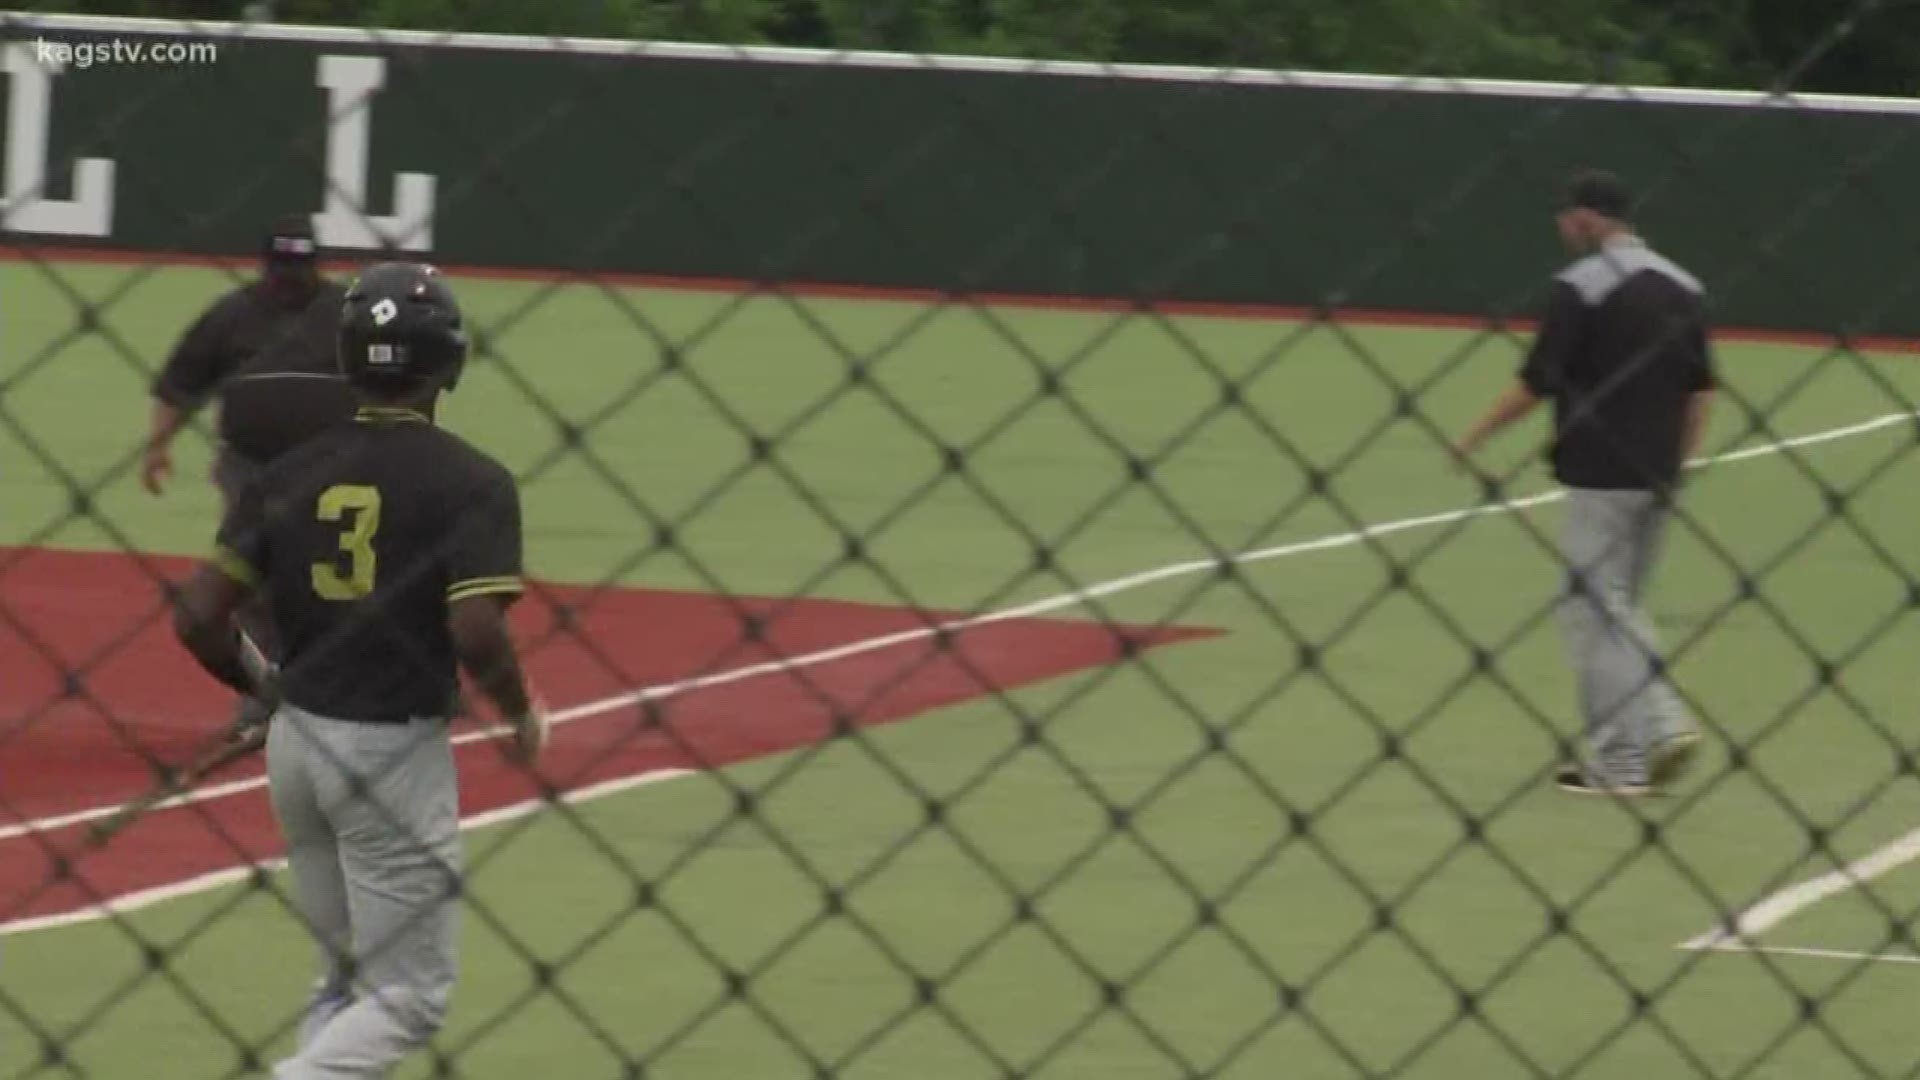 Highlights and scores from Saturday's high school baseball playoff action.